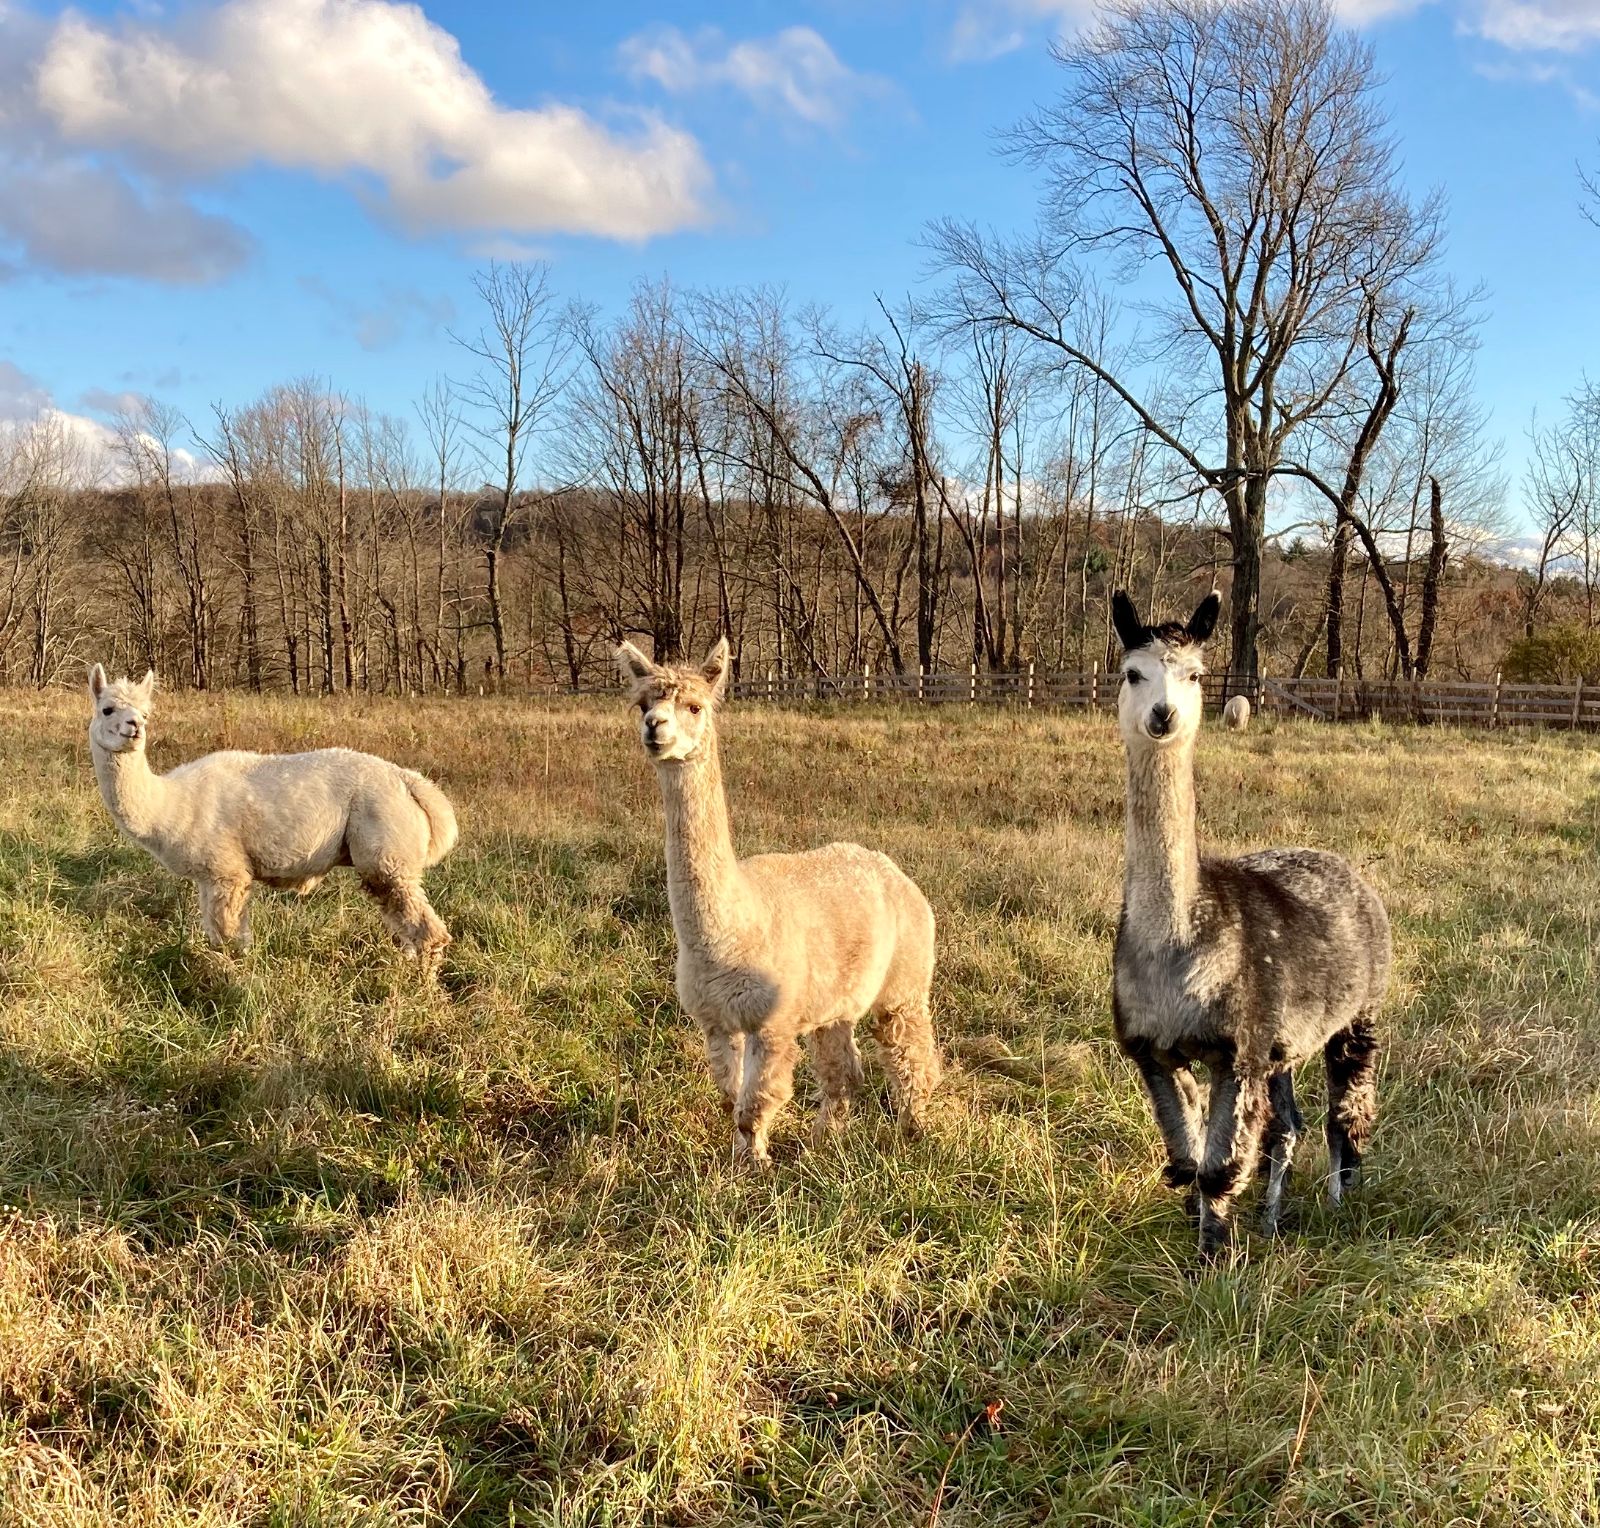 Three alpacas stand in a field. The furthest left alpaca is all-white and facing